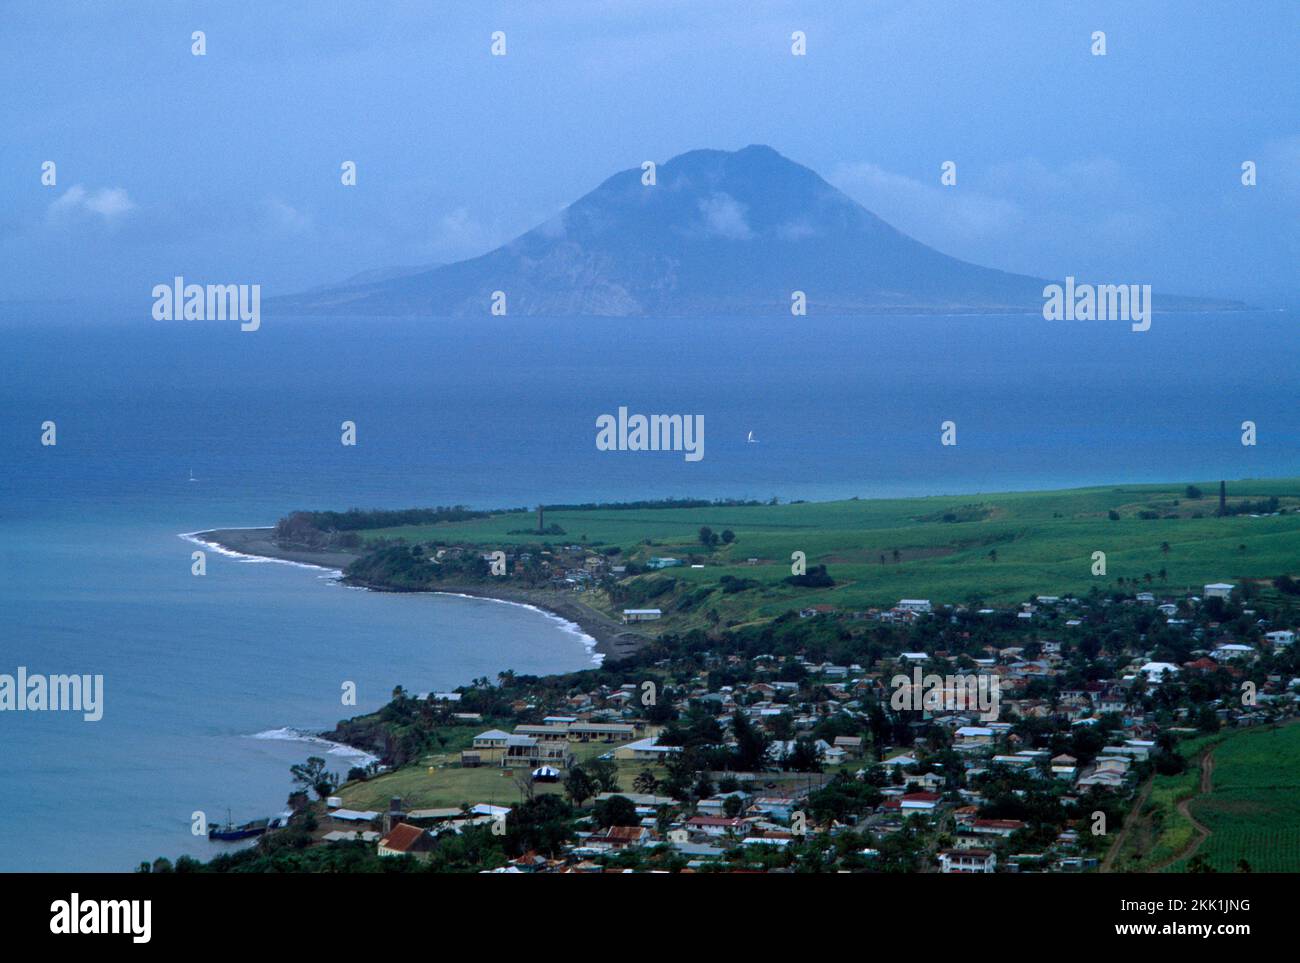 Aerial View of Island from Brimstone Fort St Kitts Looking Towards Nevis Peak Stock Photo